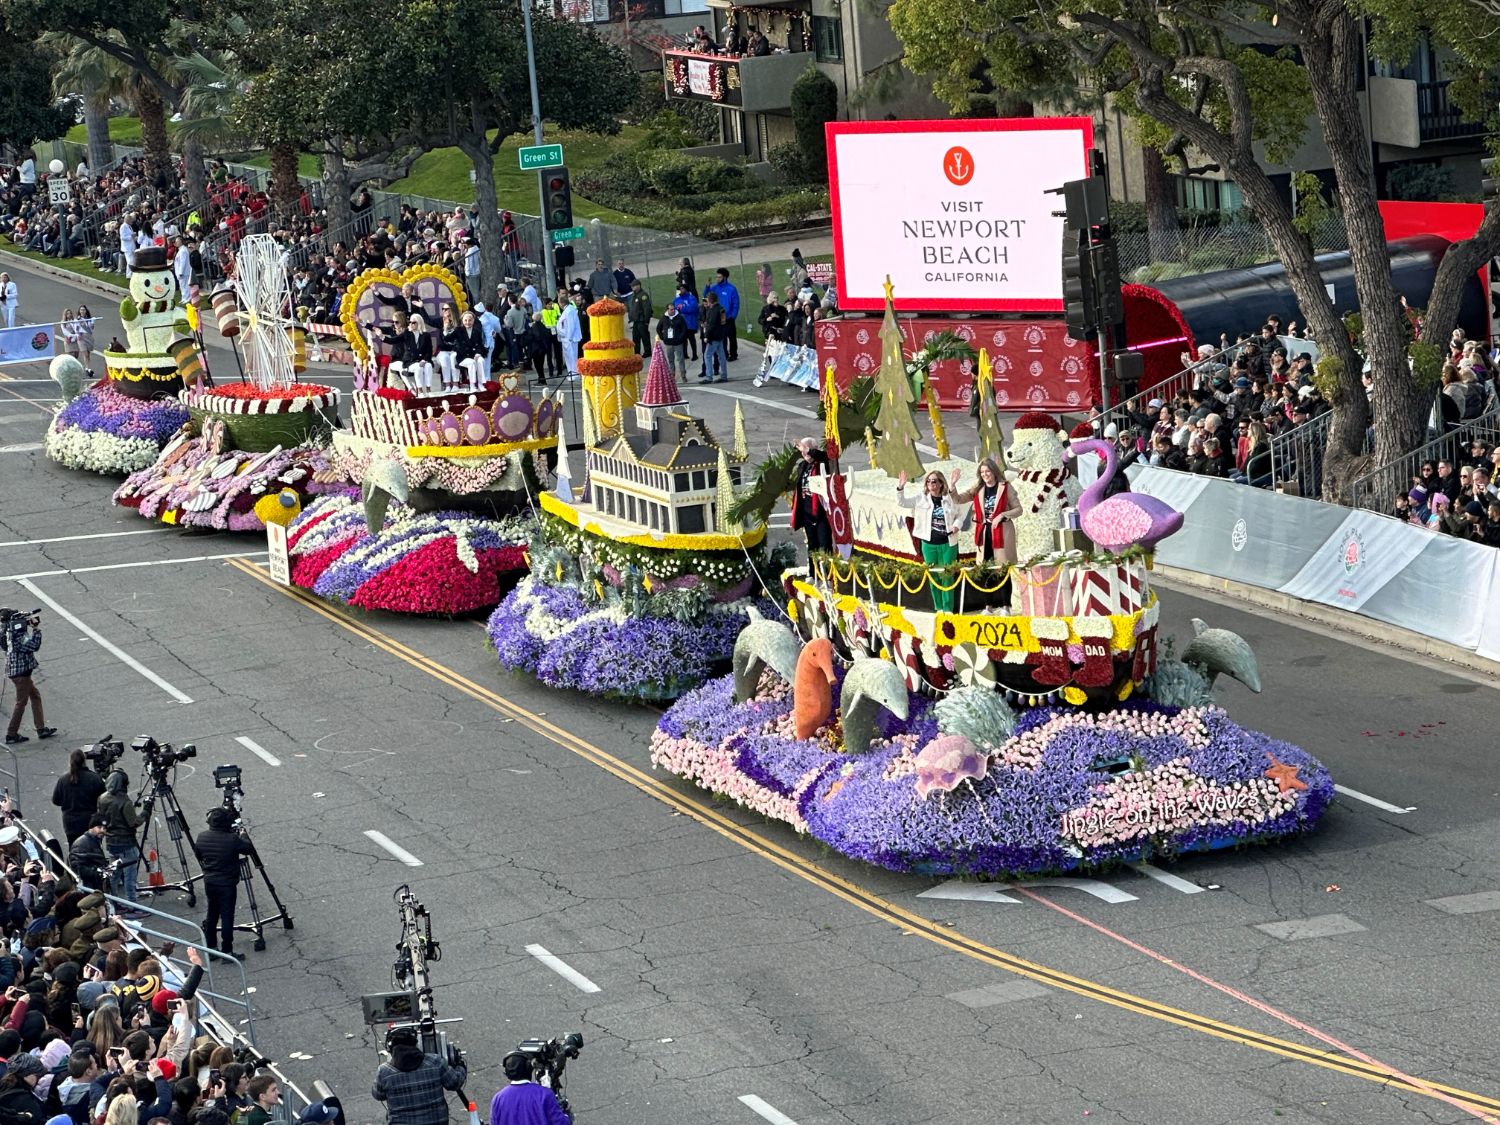 PHOTO: Bill Glazier | The South Pasadenan | The Extraordinaire Award went to Newport Beach for its “Jungle on the Waves” float, 165-feet in length, making it the longest-ever entry in the parade.